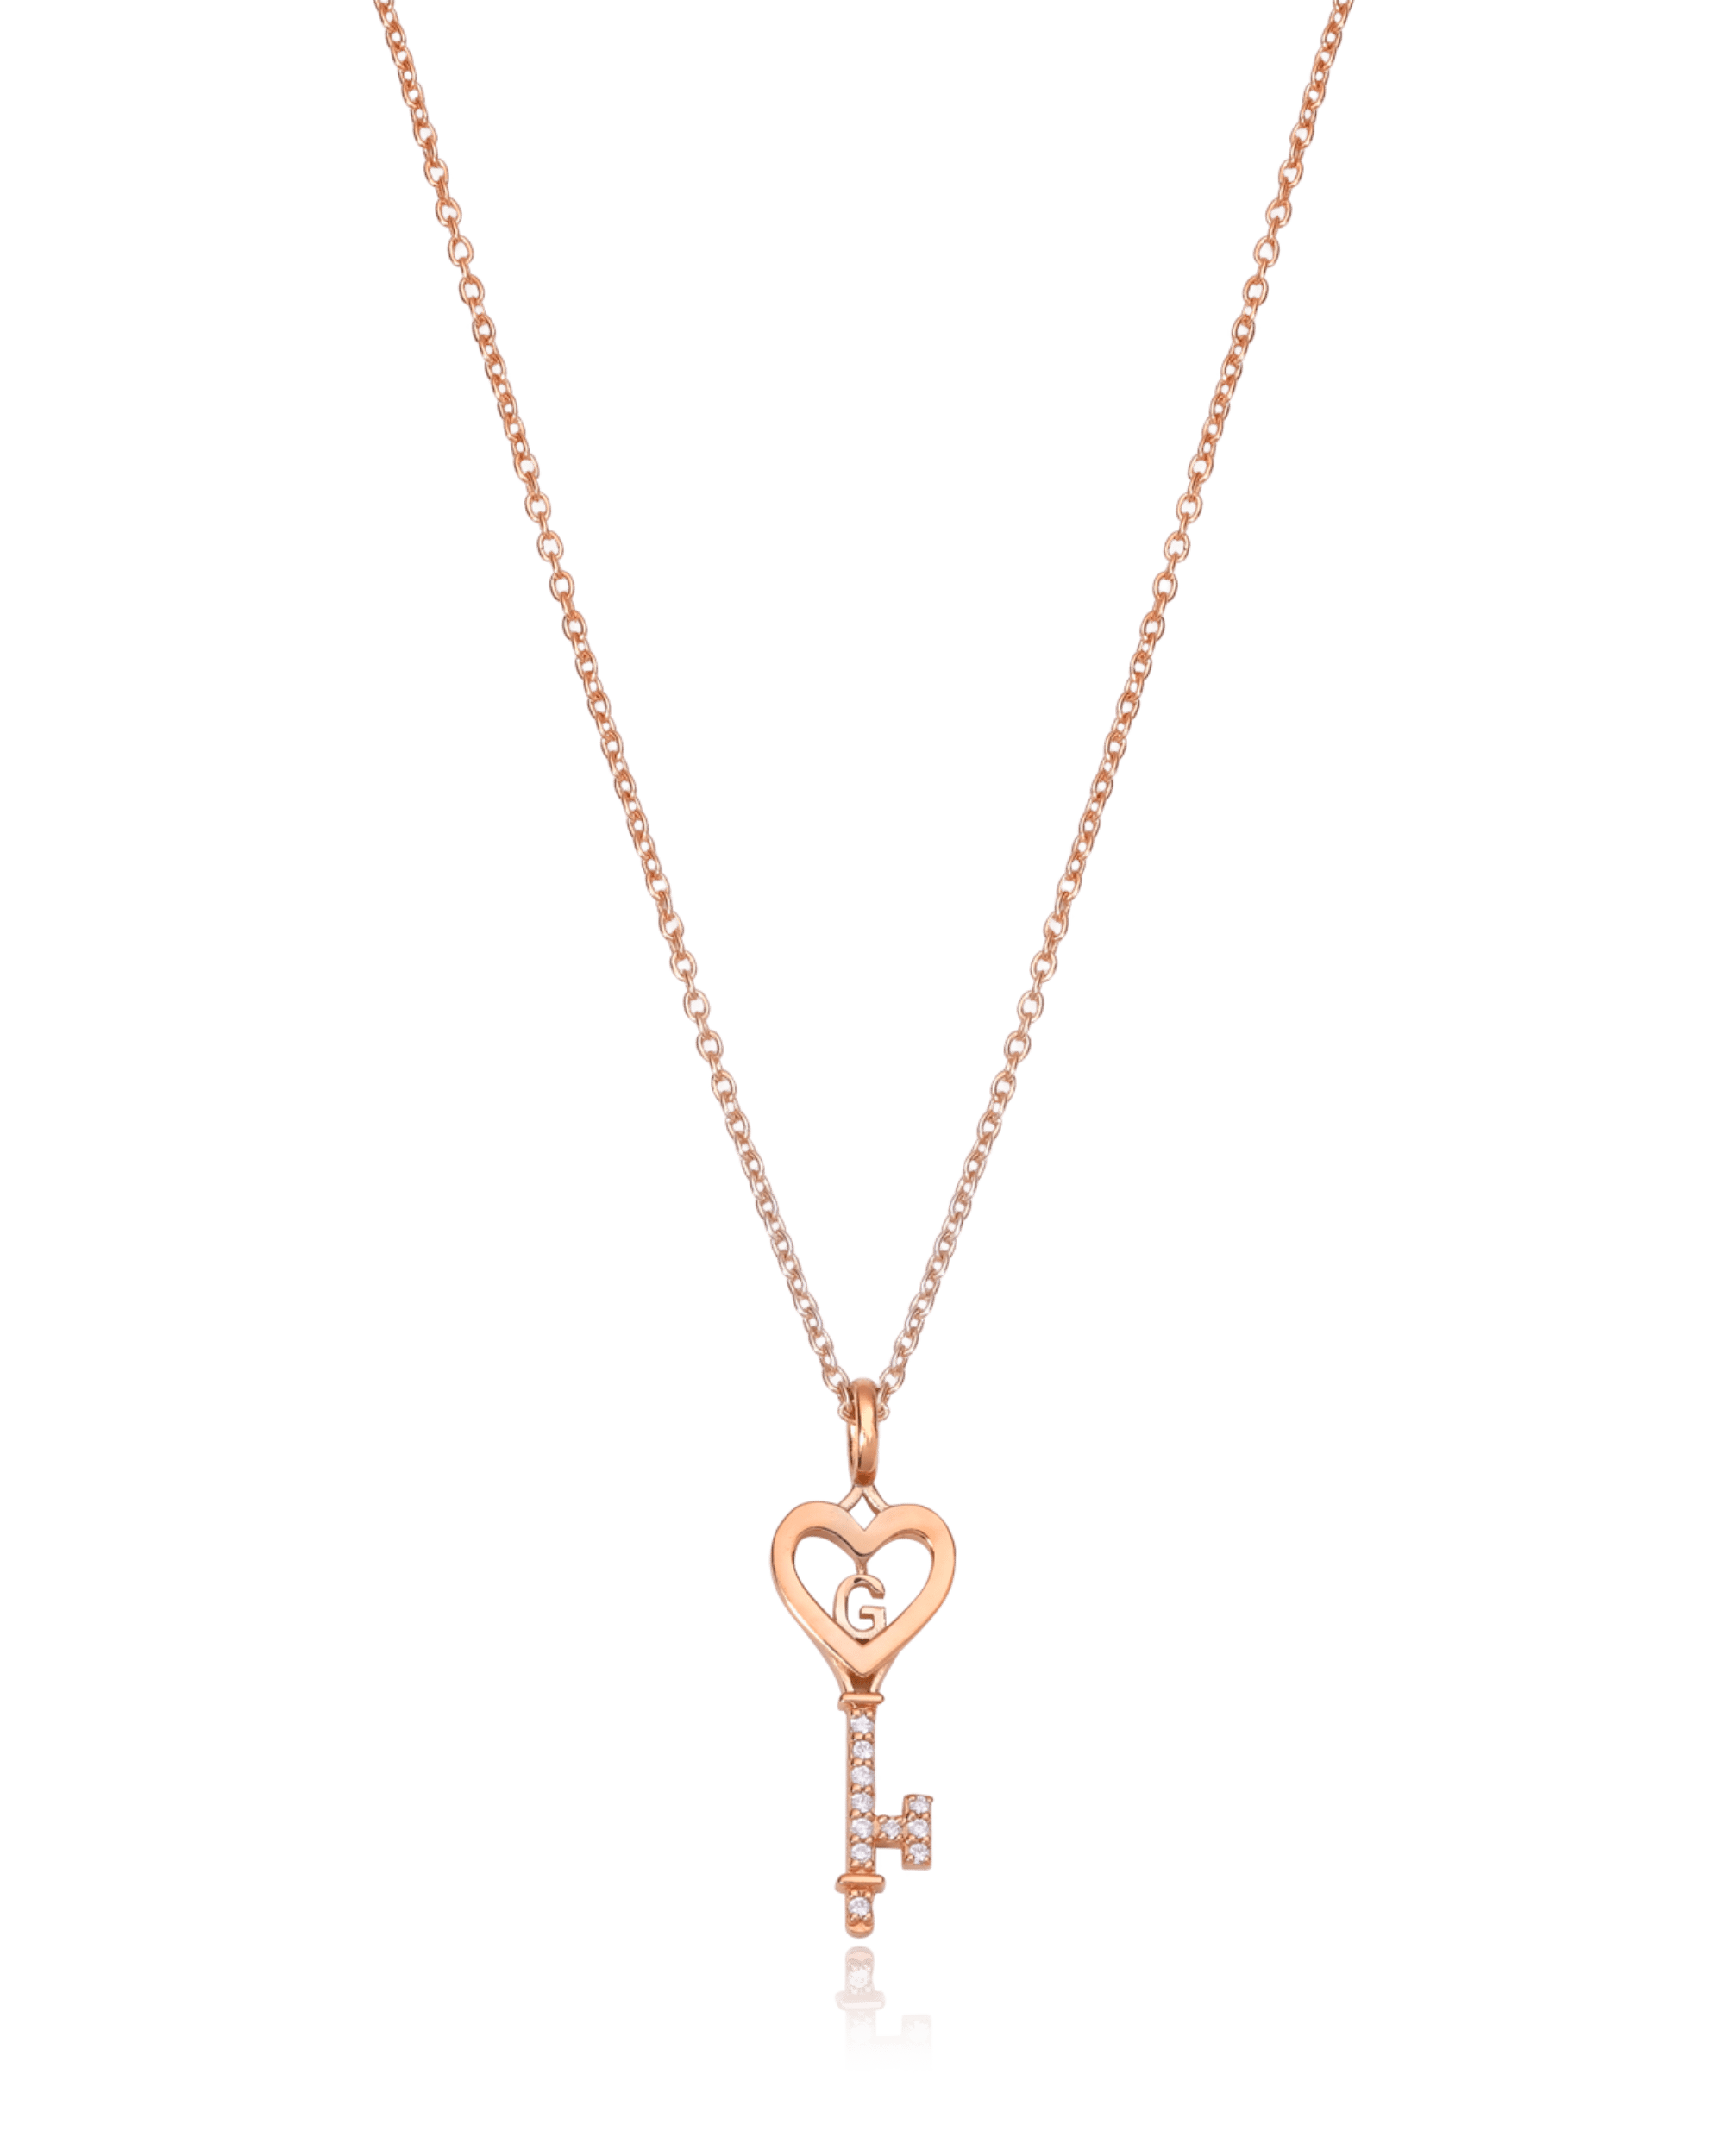 Key To My Heart - 18K Gold Vermeil Necklaces magal-dev 